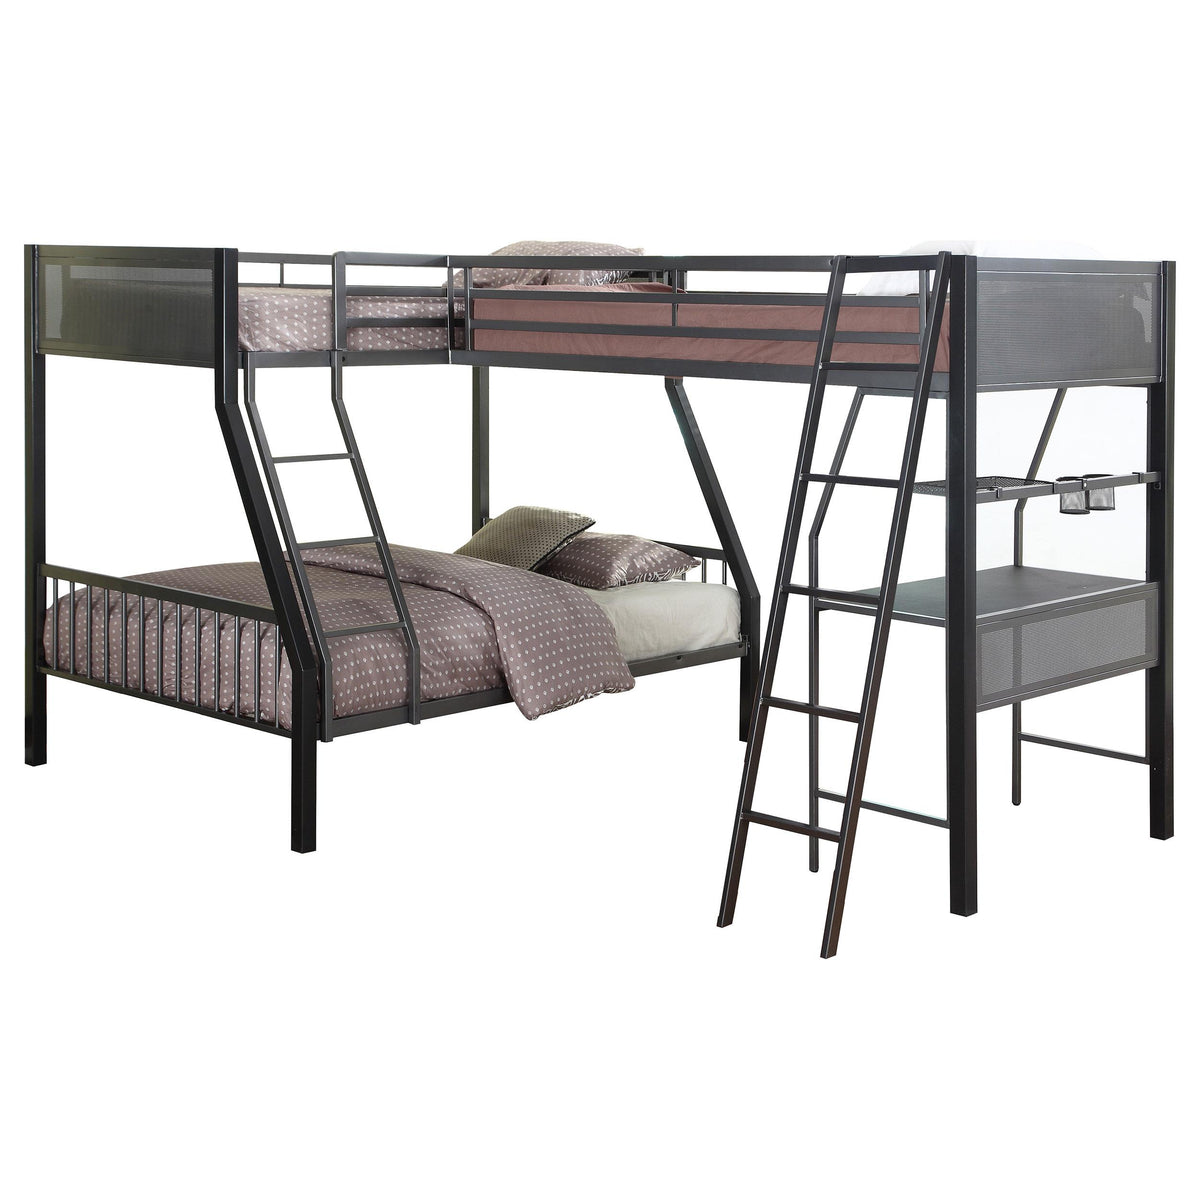 Meyers 2-piece Metal Twin Over Full Bunk Bed Set Black and Gunmetal Meyers 2-piece Metal Twin Over Full Bunk Bed Set Black and Gunmetal Half Price Furniture